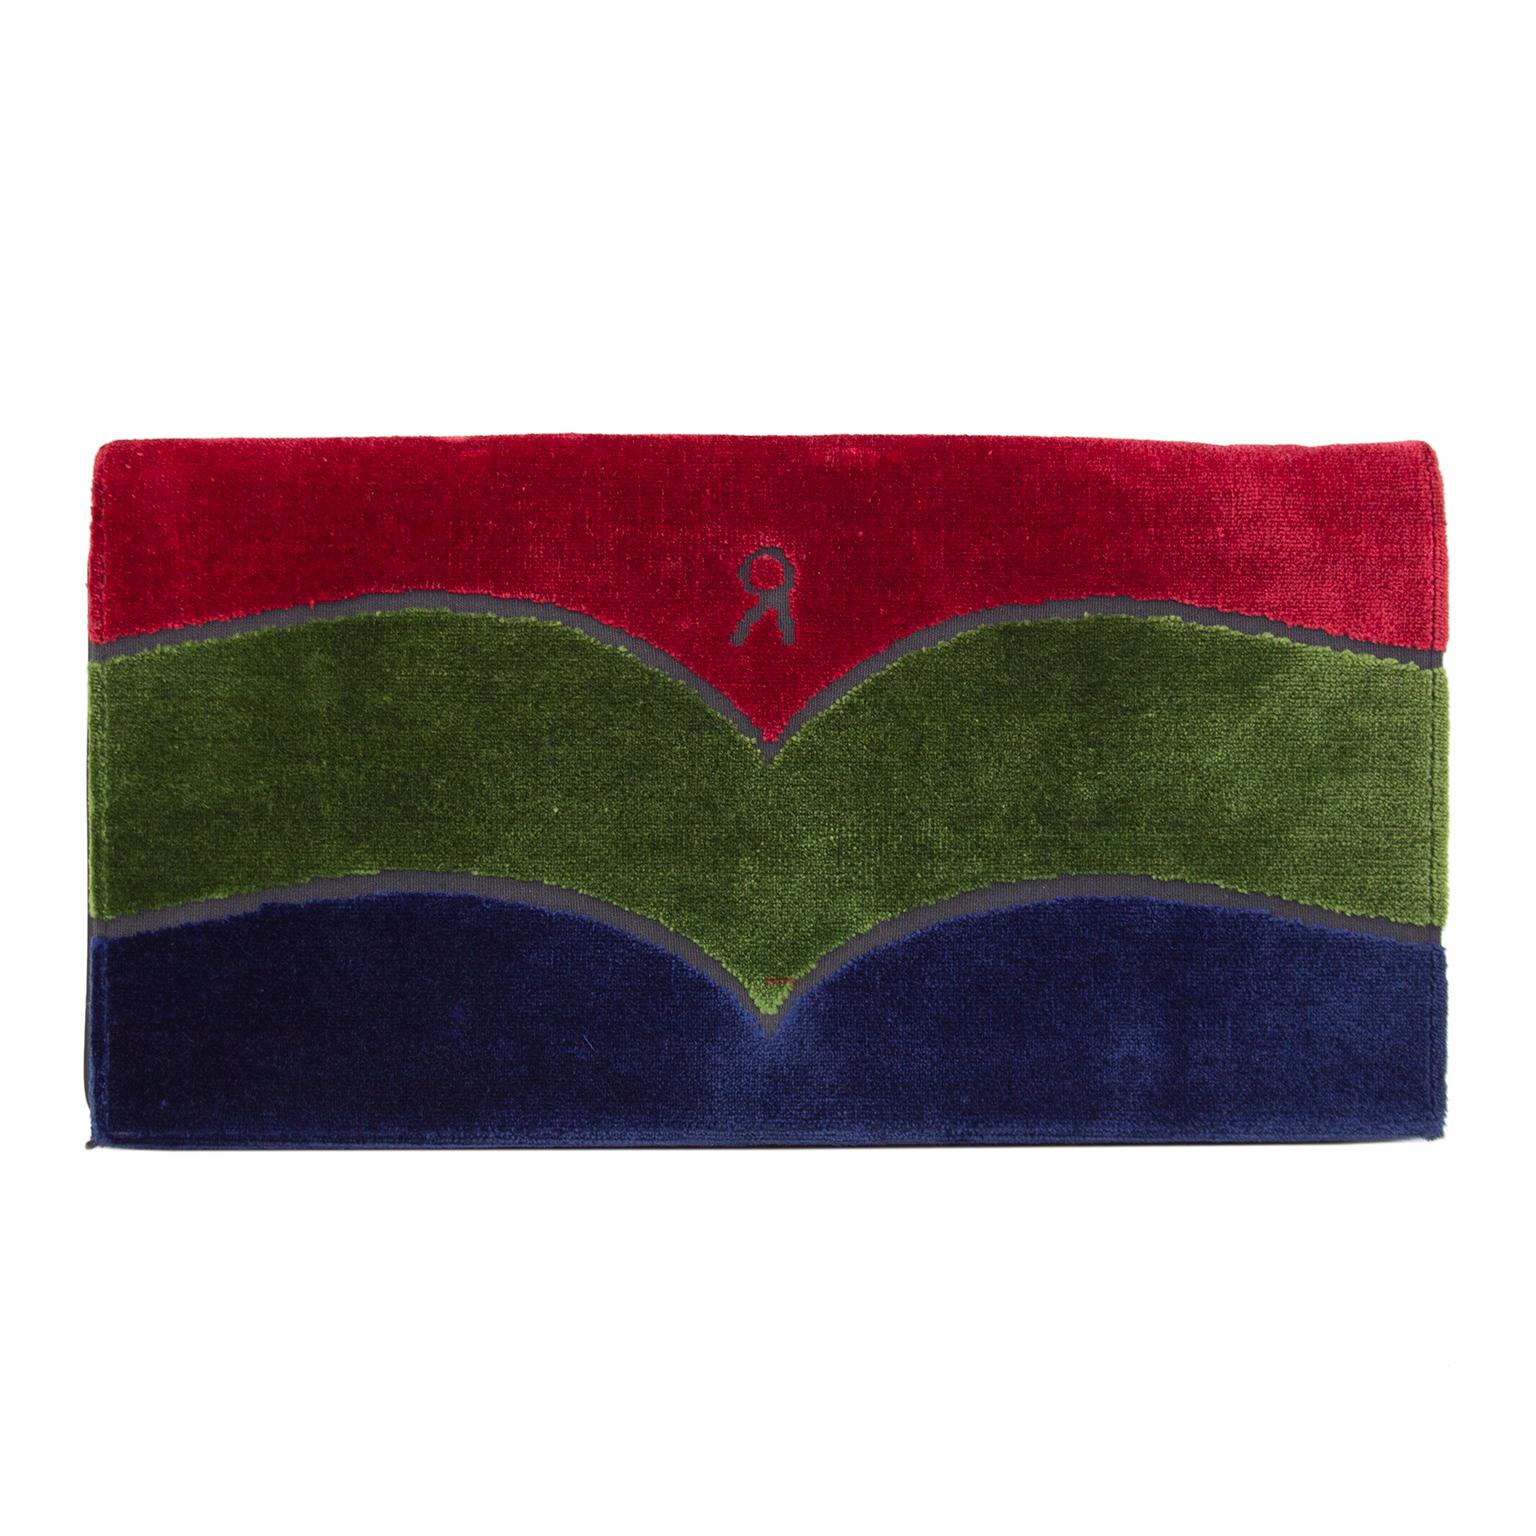 Roberta Di Camerino clutch dating from the 1970s. The iconic Roberta Di Camerino navy, green and red velvet colour blocking with small 'R' logo. Solid navy back and black leather interior. Optional gold metal chain that can be worn on the shoulder